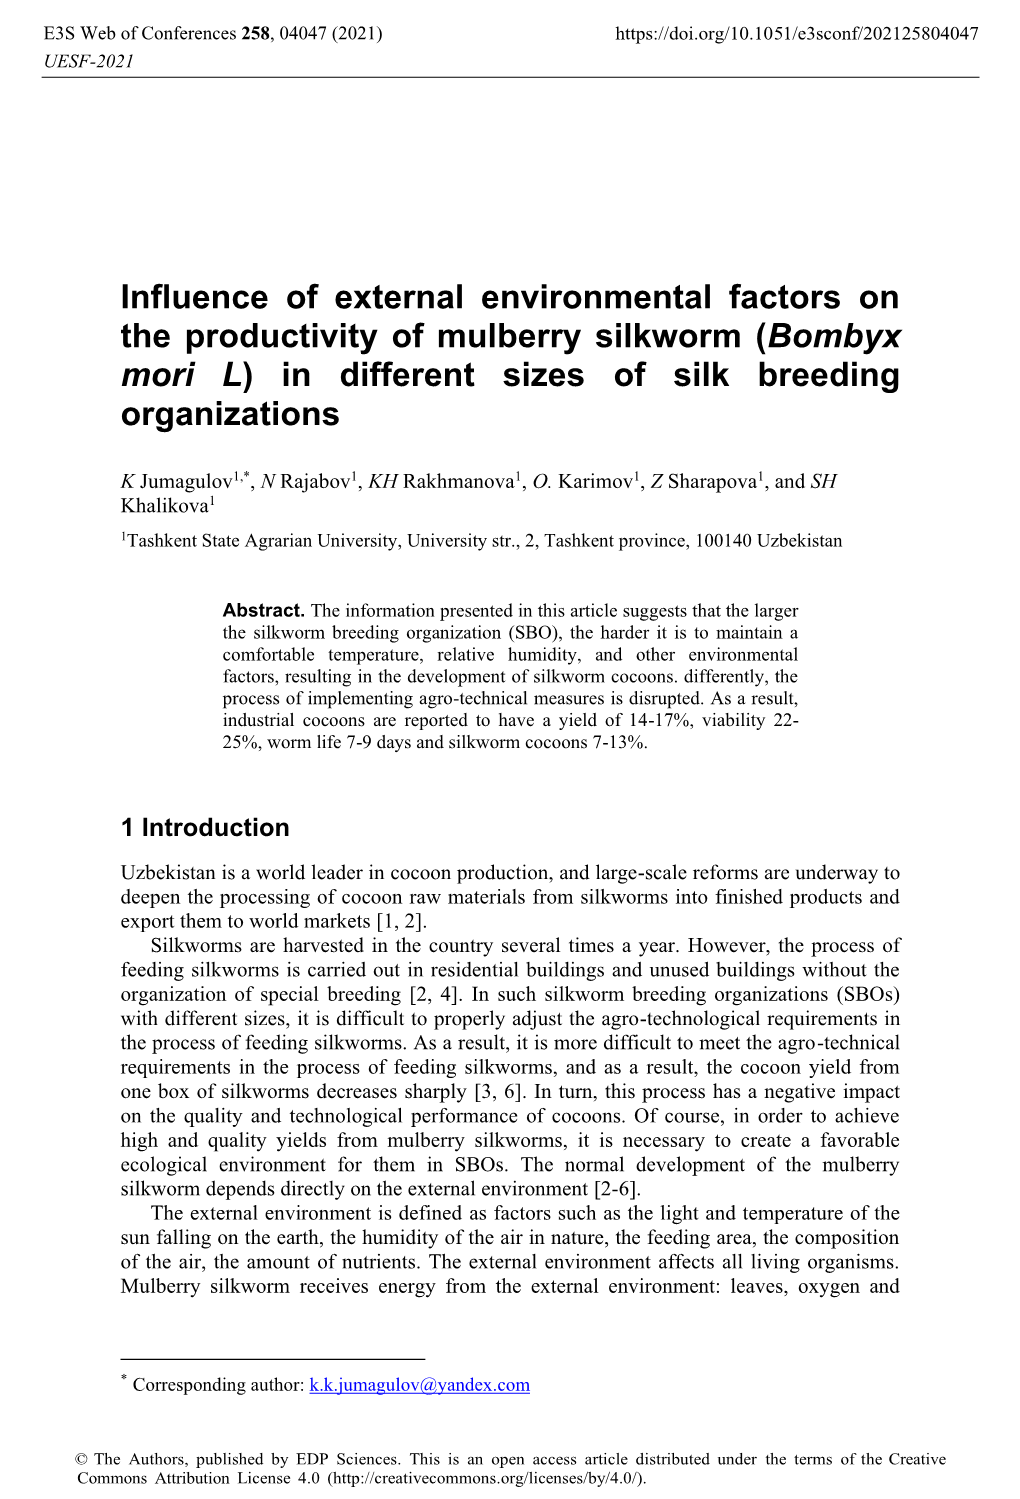 Influence of External Environmental Factors on the Productivity of Mulberry Silkworm (Bombyx Mori L) in Different Sizes of Silk Breeding Organizations